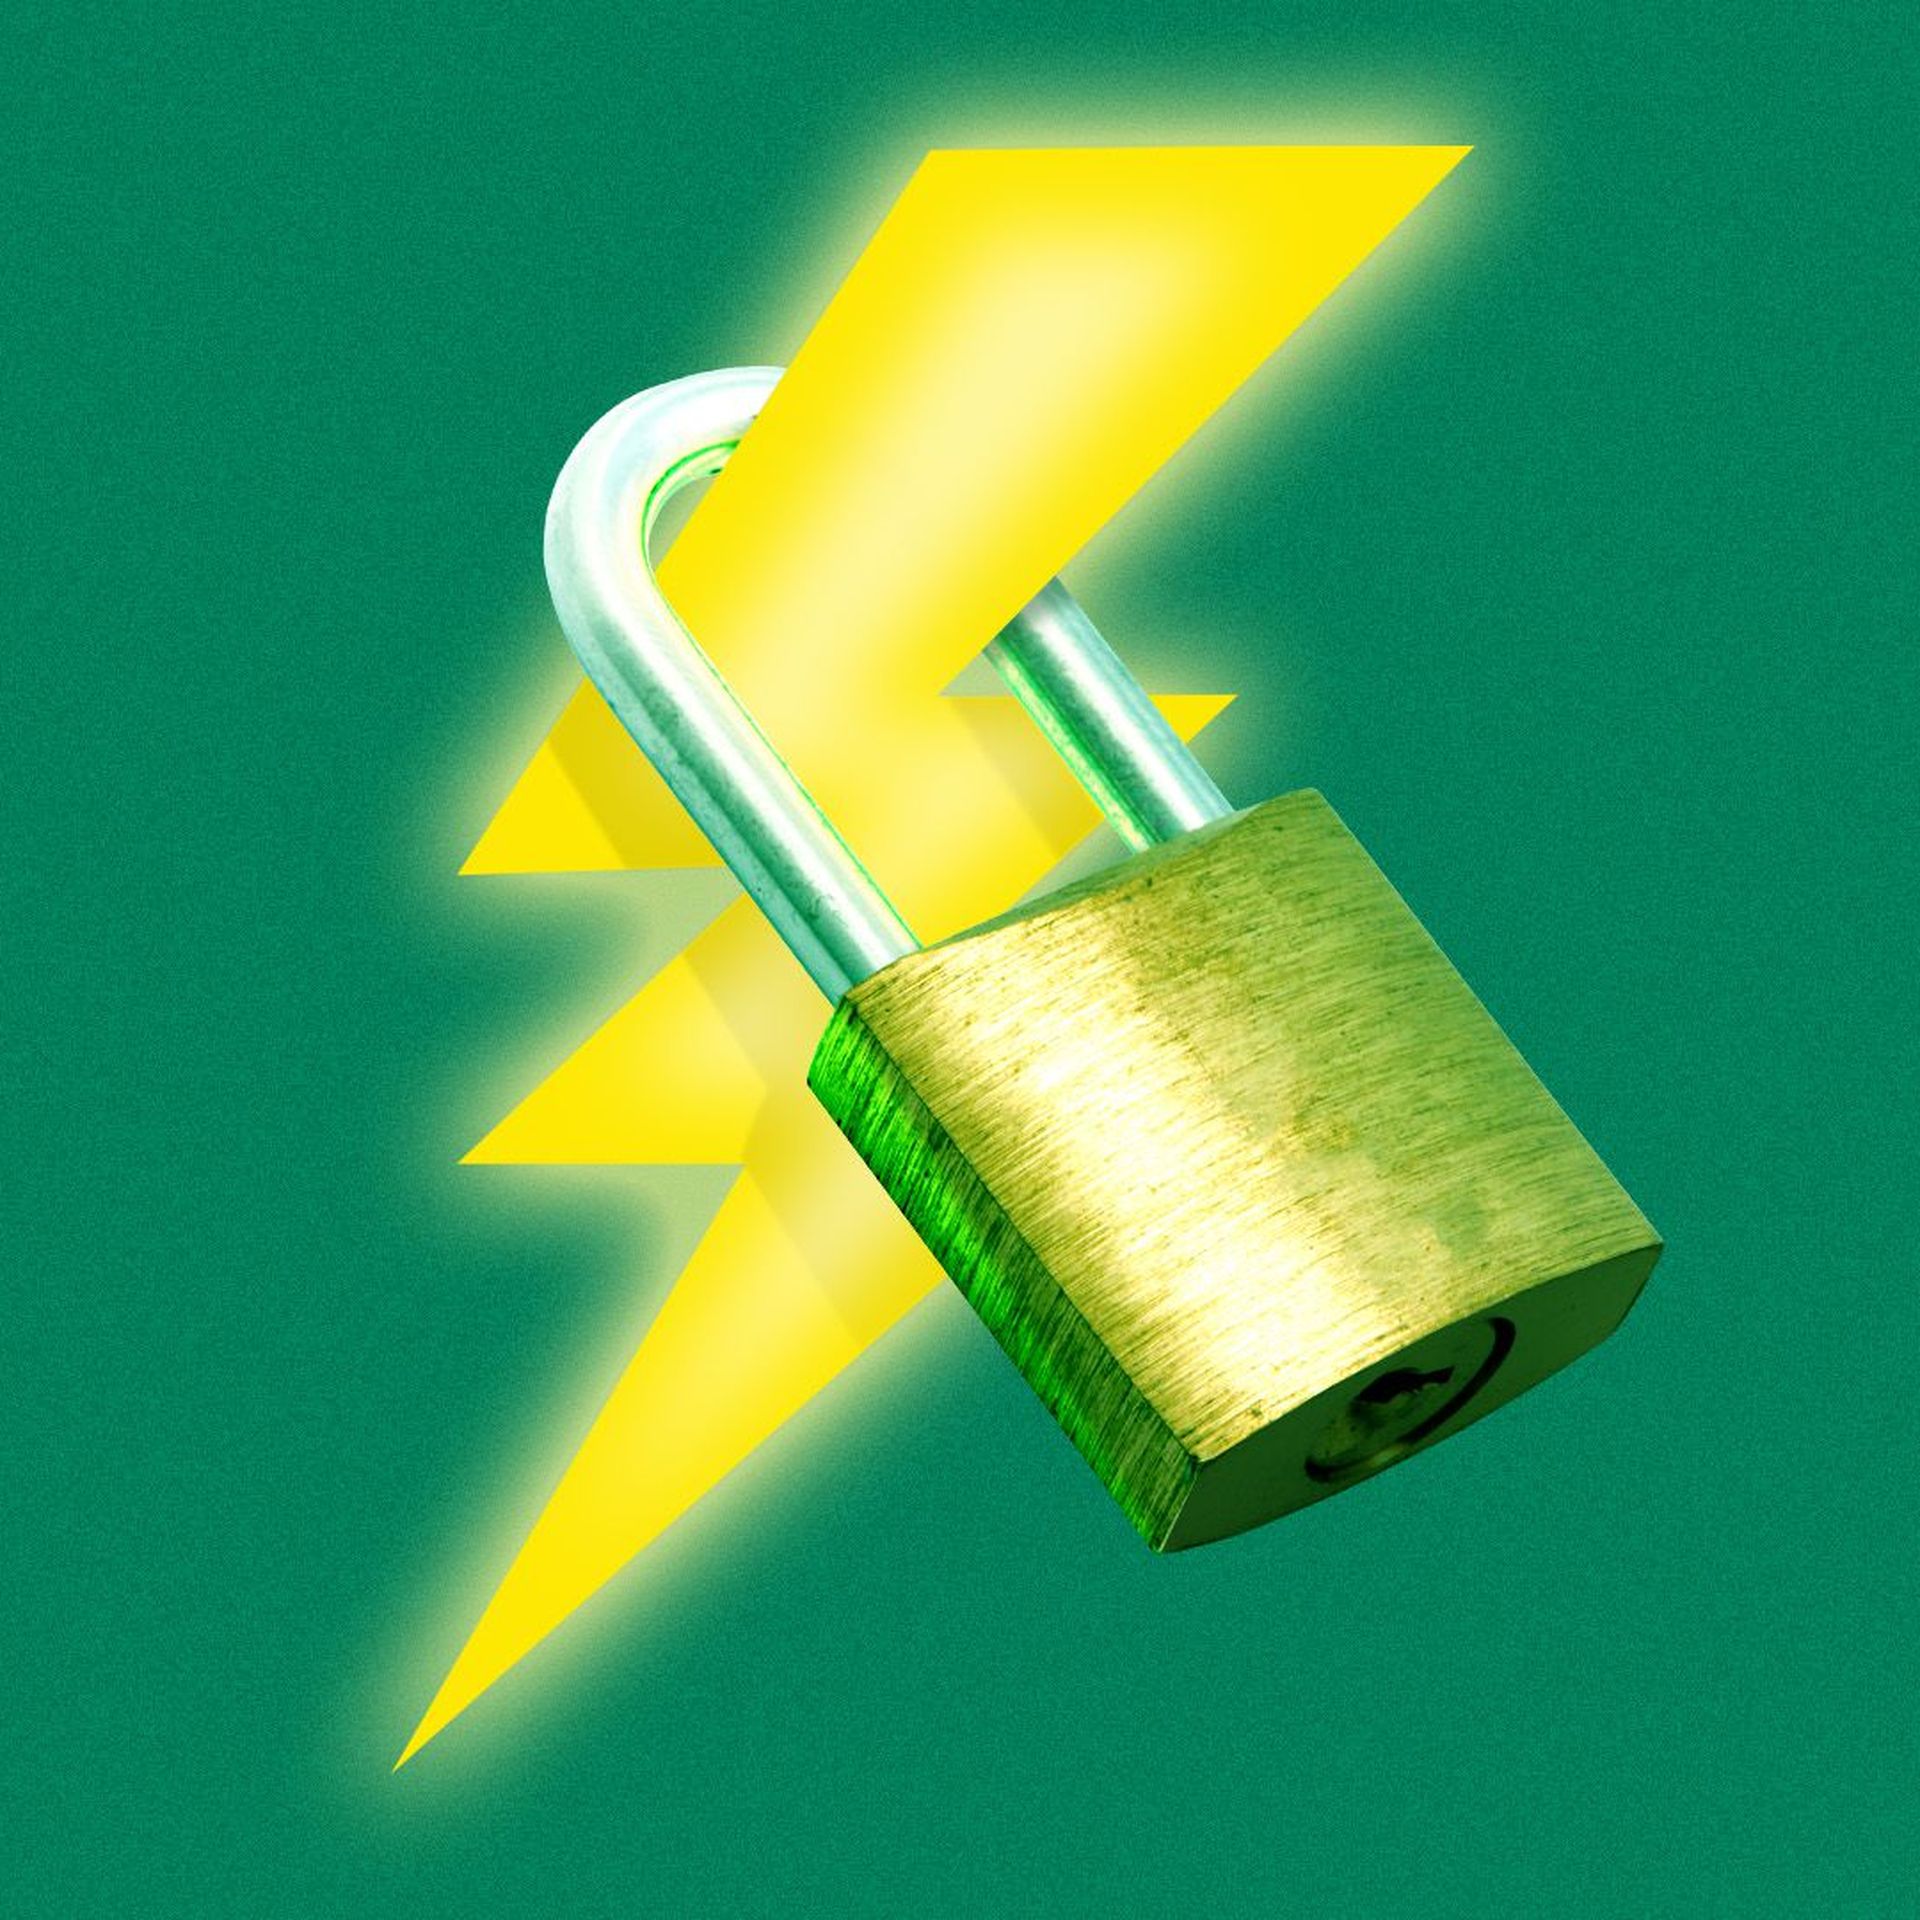 Illustration of a lightning bolt icon with a lock secured around it